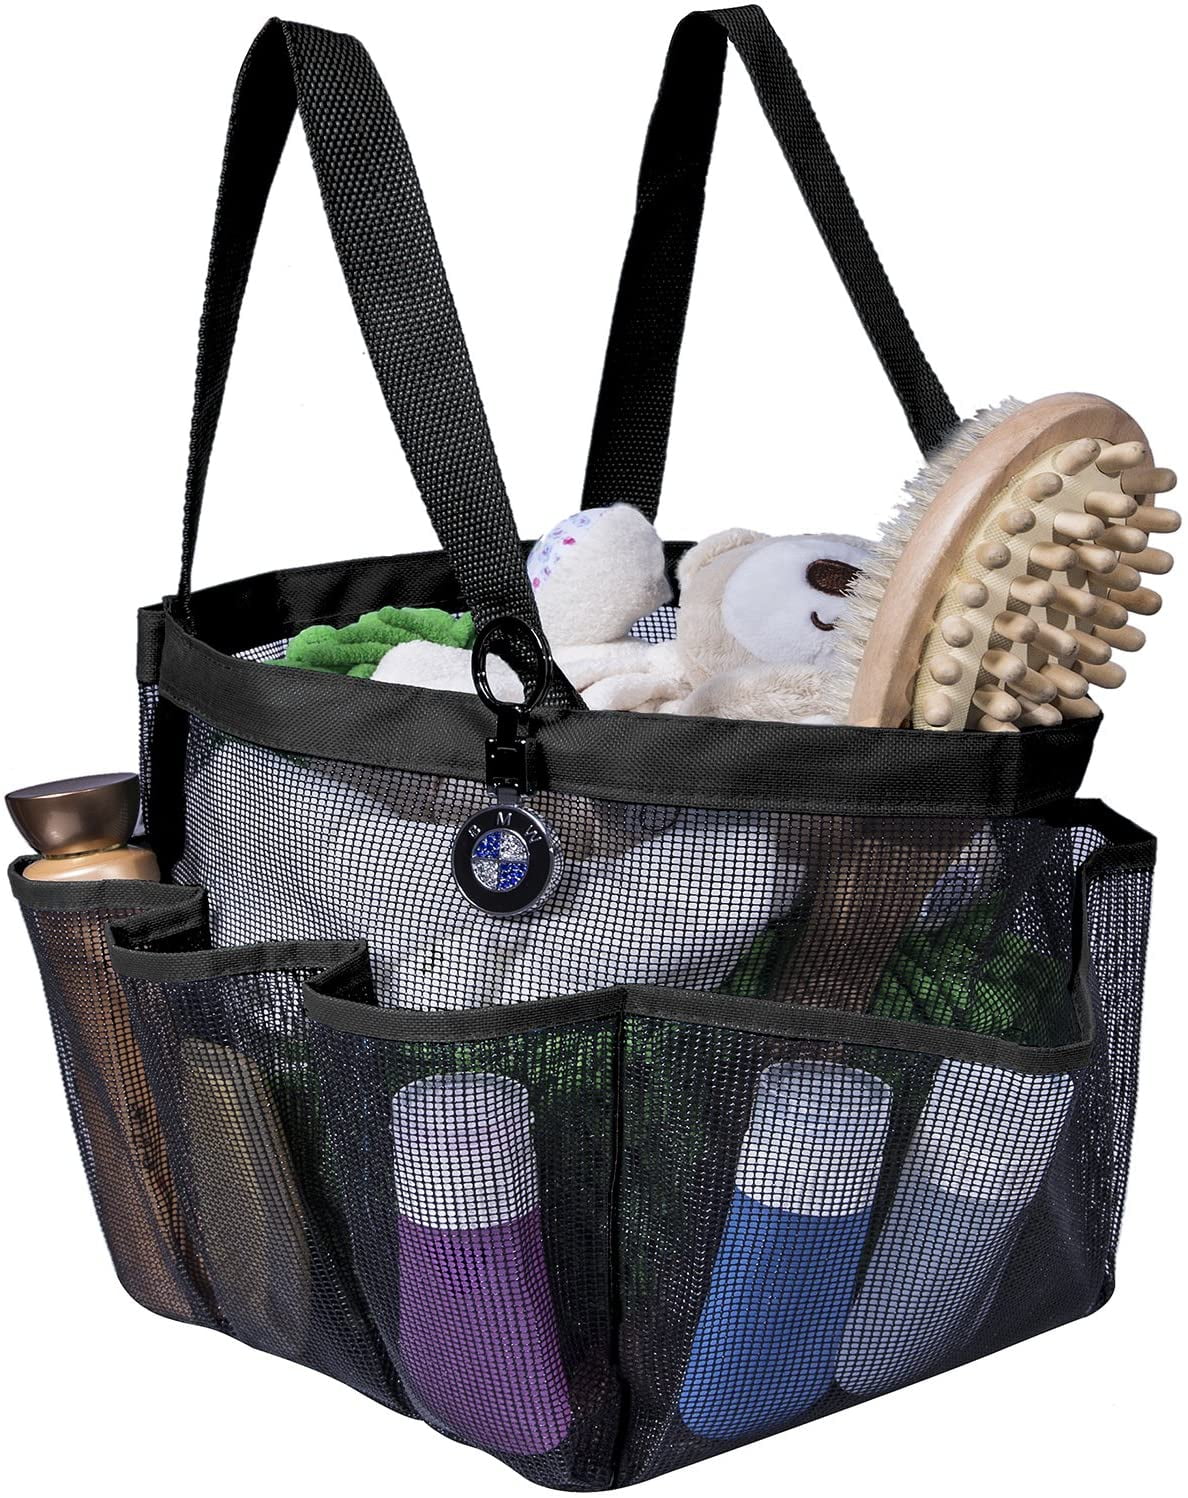 Portable Quick-drying Shower Hanging Caddy Tote Bag Bathroom Storage Bag Hot 